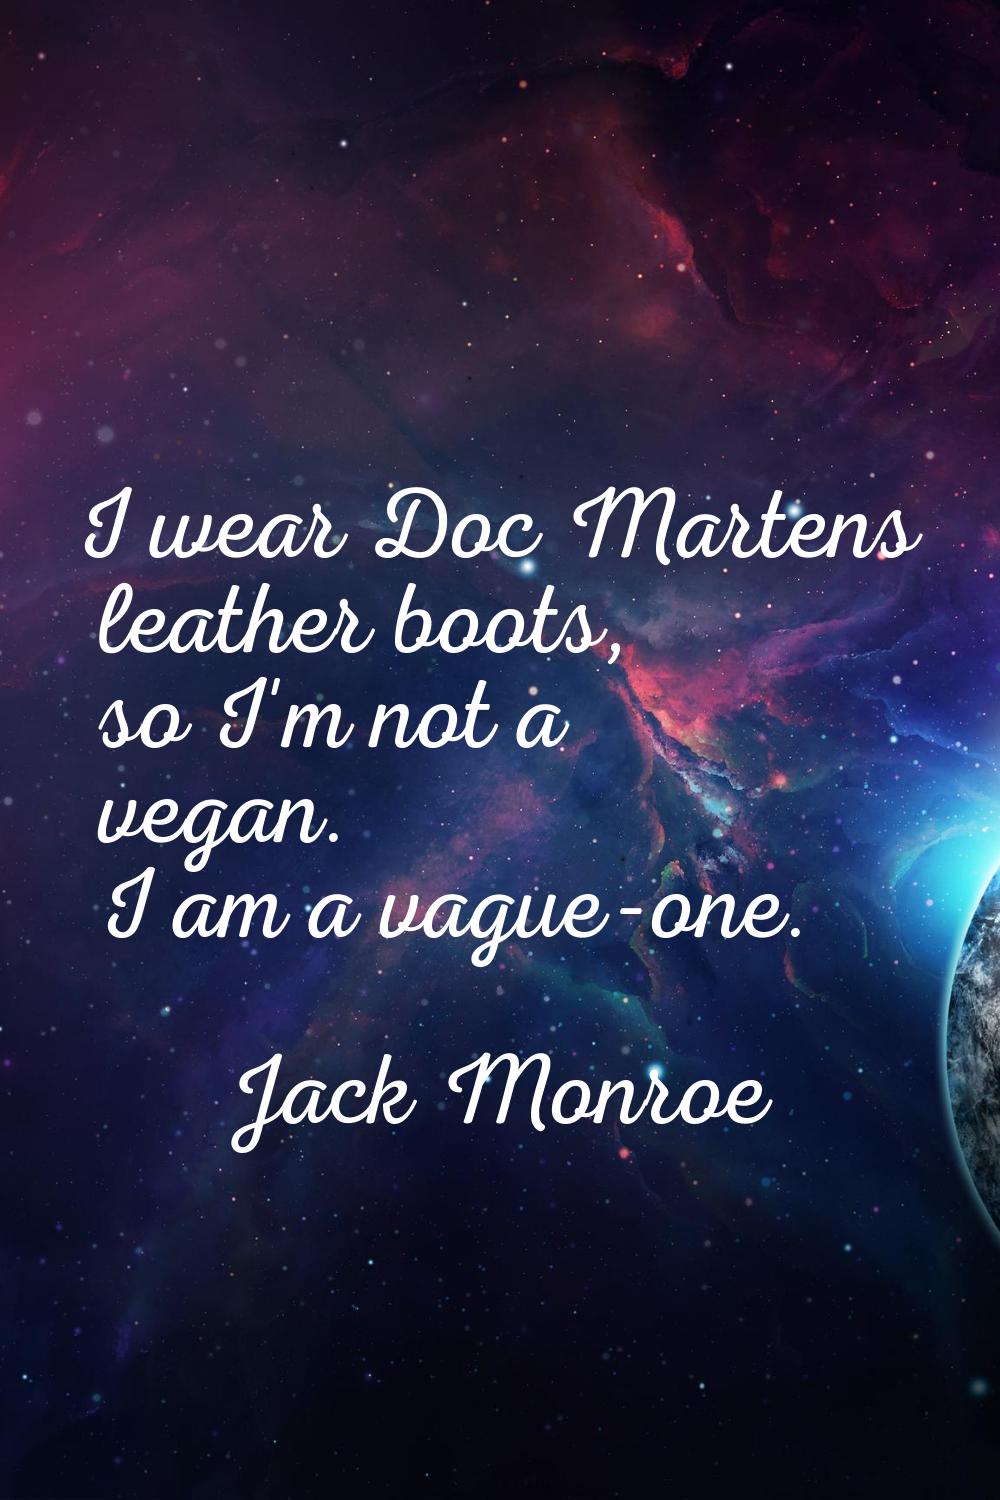 I wear Doc Martens leather boots, so I'm not a vegan. I am a vague-one.